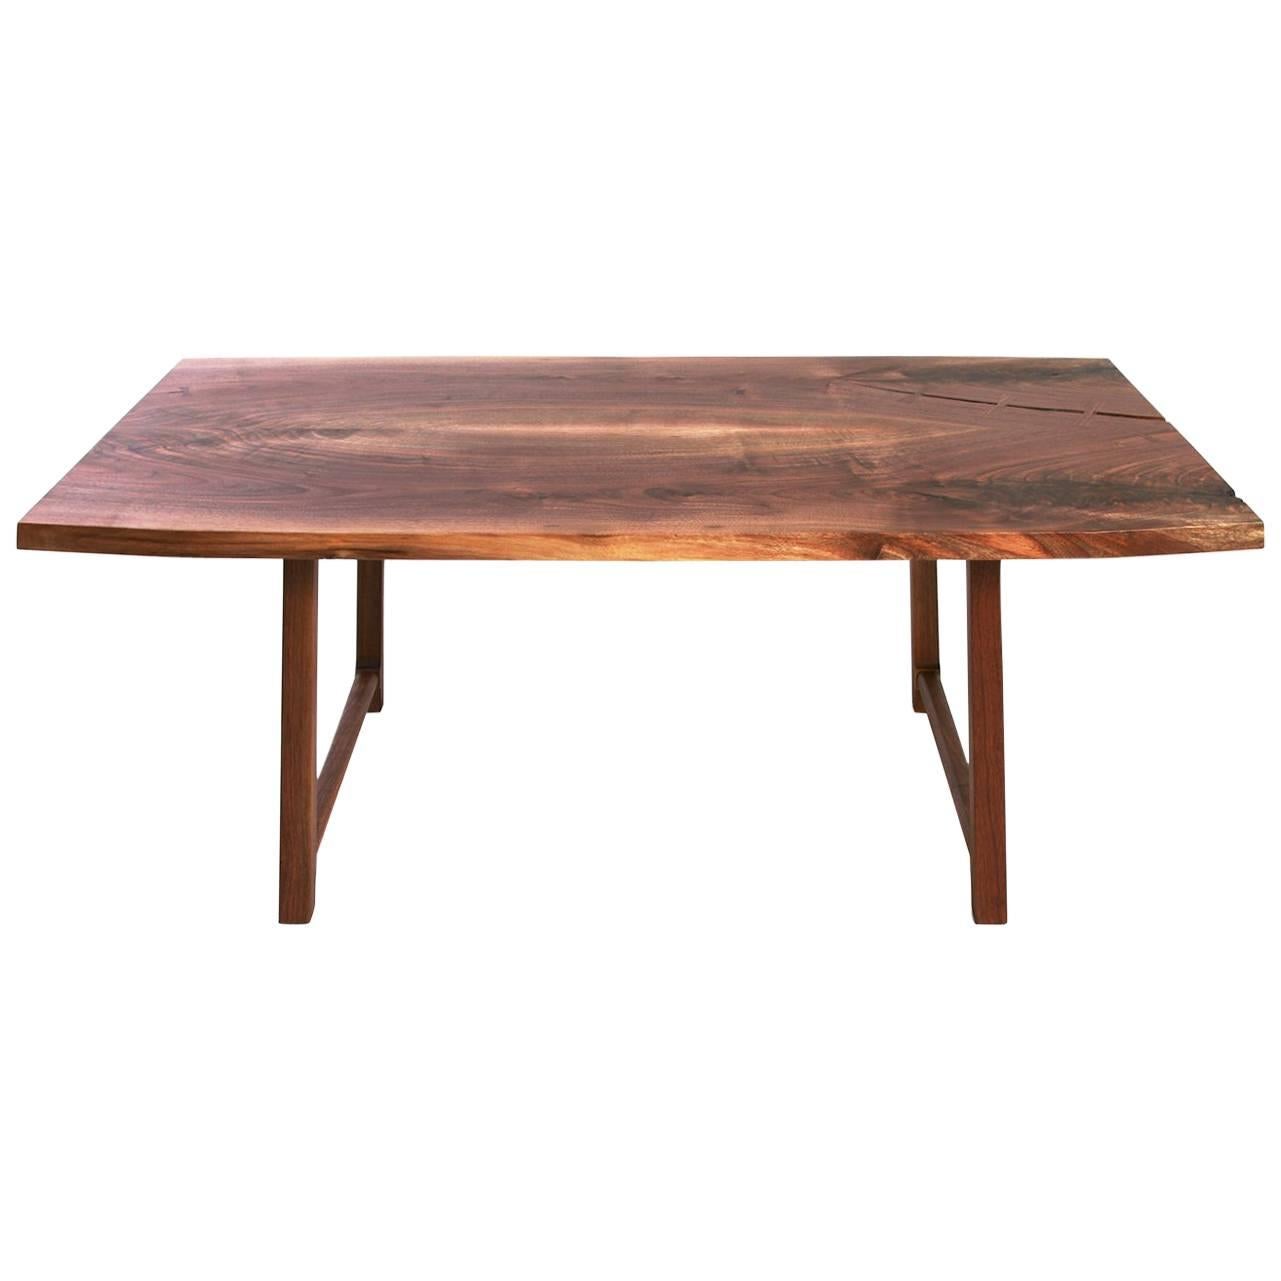 Highland Black Walnut Mid-Century Style Coffee Table by New York Heartwoods